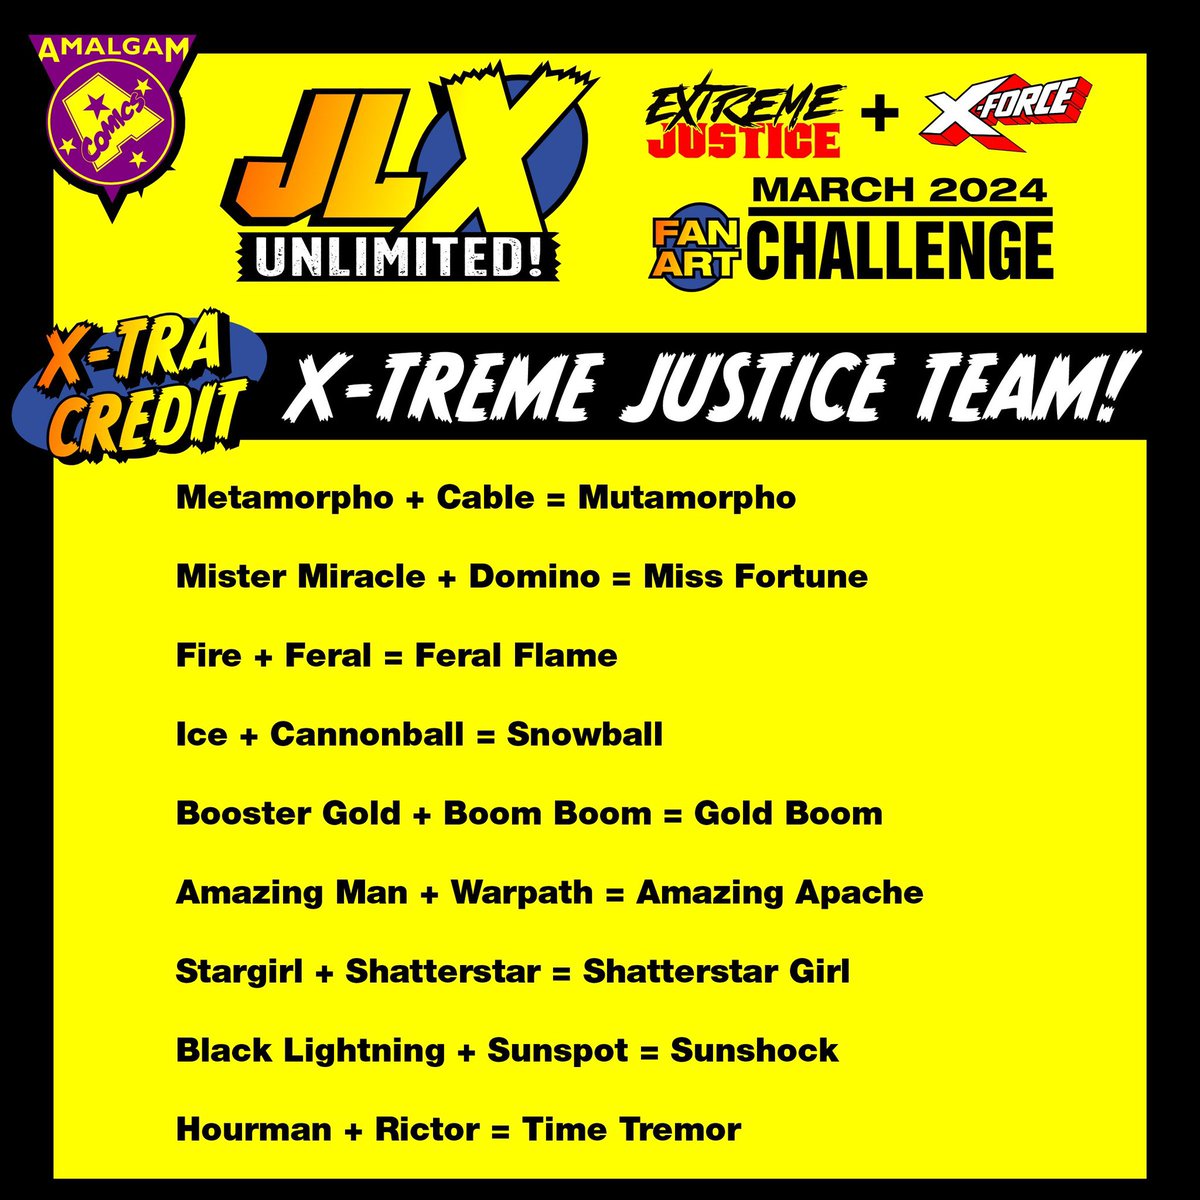 X-TRA CREDIT ❌ Extreme JLX-FORCE ❌ featuring: MUTAMORPHO, GOLD BOOM, SNOWBALL, MISS FORTUNE, FERAL FLAME, SHATTERSTARGIRL, AMAZING APACHE, SUNSHOCK, TIME TREMOR, & X-TRA X-TRA CREDIT, SOUNDWAVE (Siryn + Airwave) #xforce #justiceleague #dccomics #marvel #amalgam2024